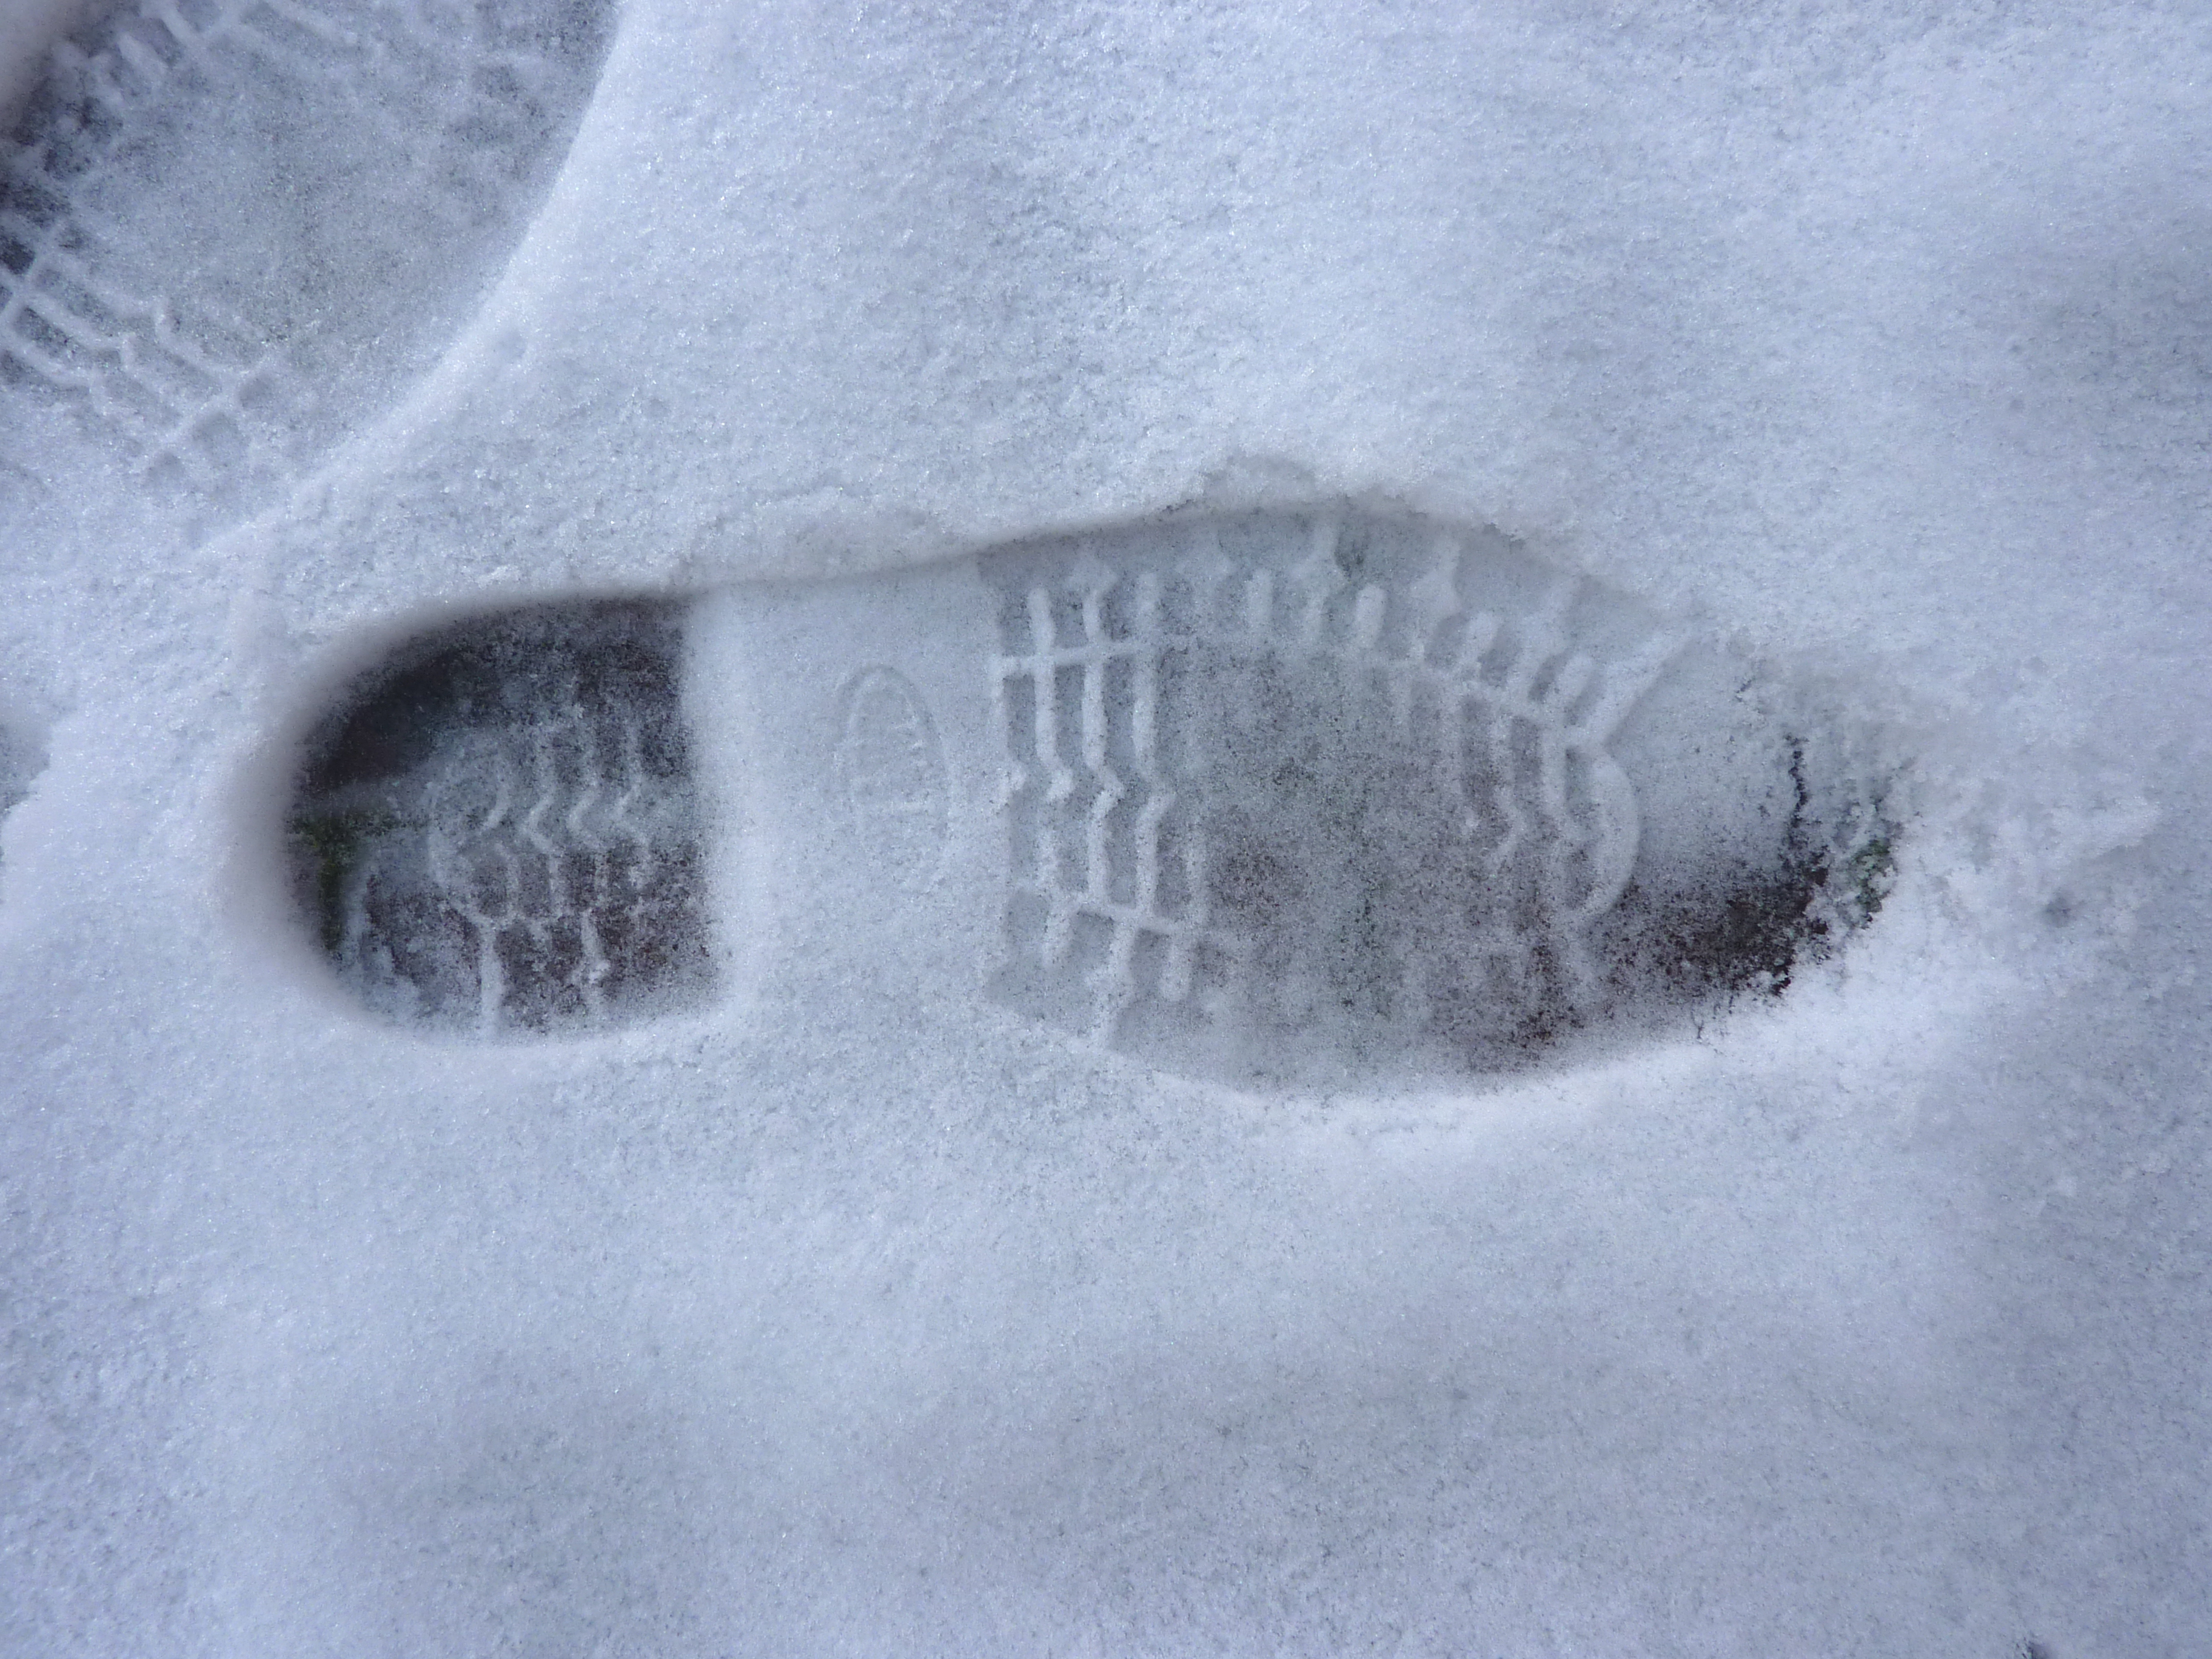 Footprints in snow | photo page - everystockphoto